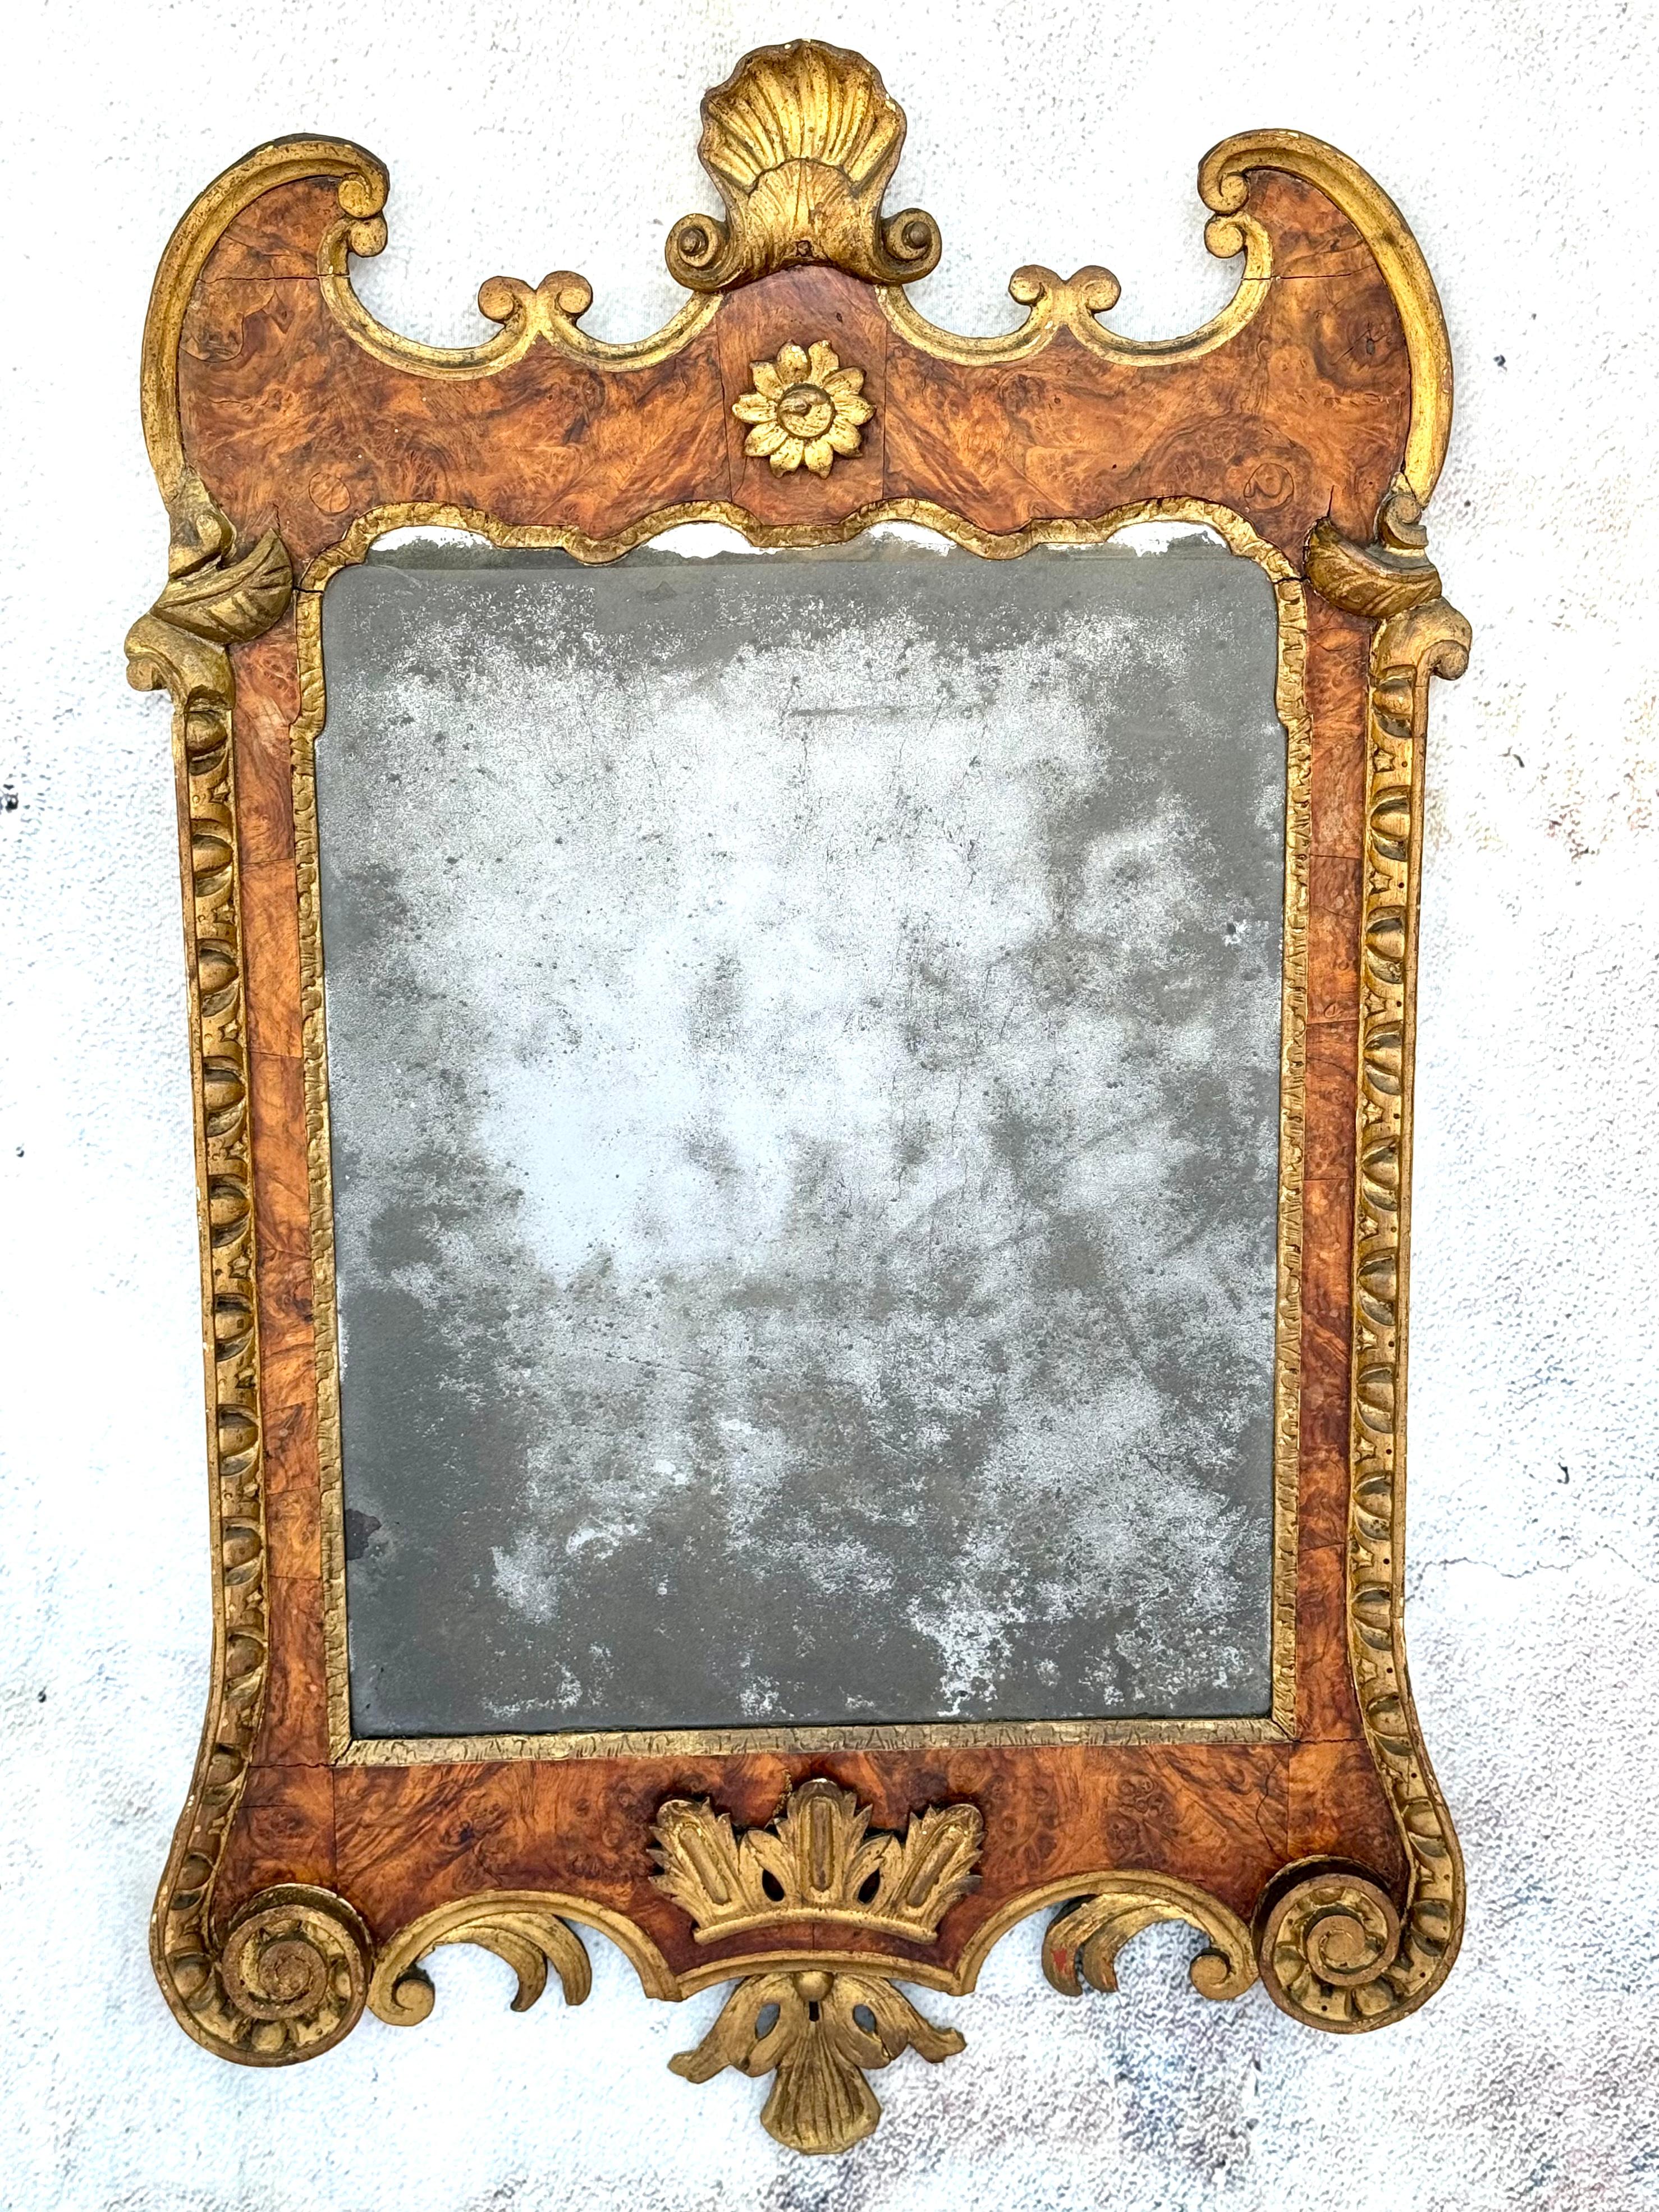 A fine and impressive 18th Century Georgian giltwood and burl walnut mirror. Features scalloped gilt crest and ornate gilt surrounding the walnut frame. Centered with a parcel giltwood crown in the lower section. Retaining the original mirror plate.